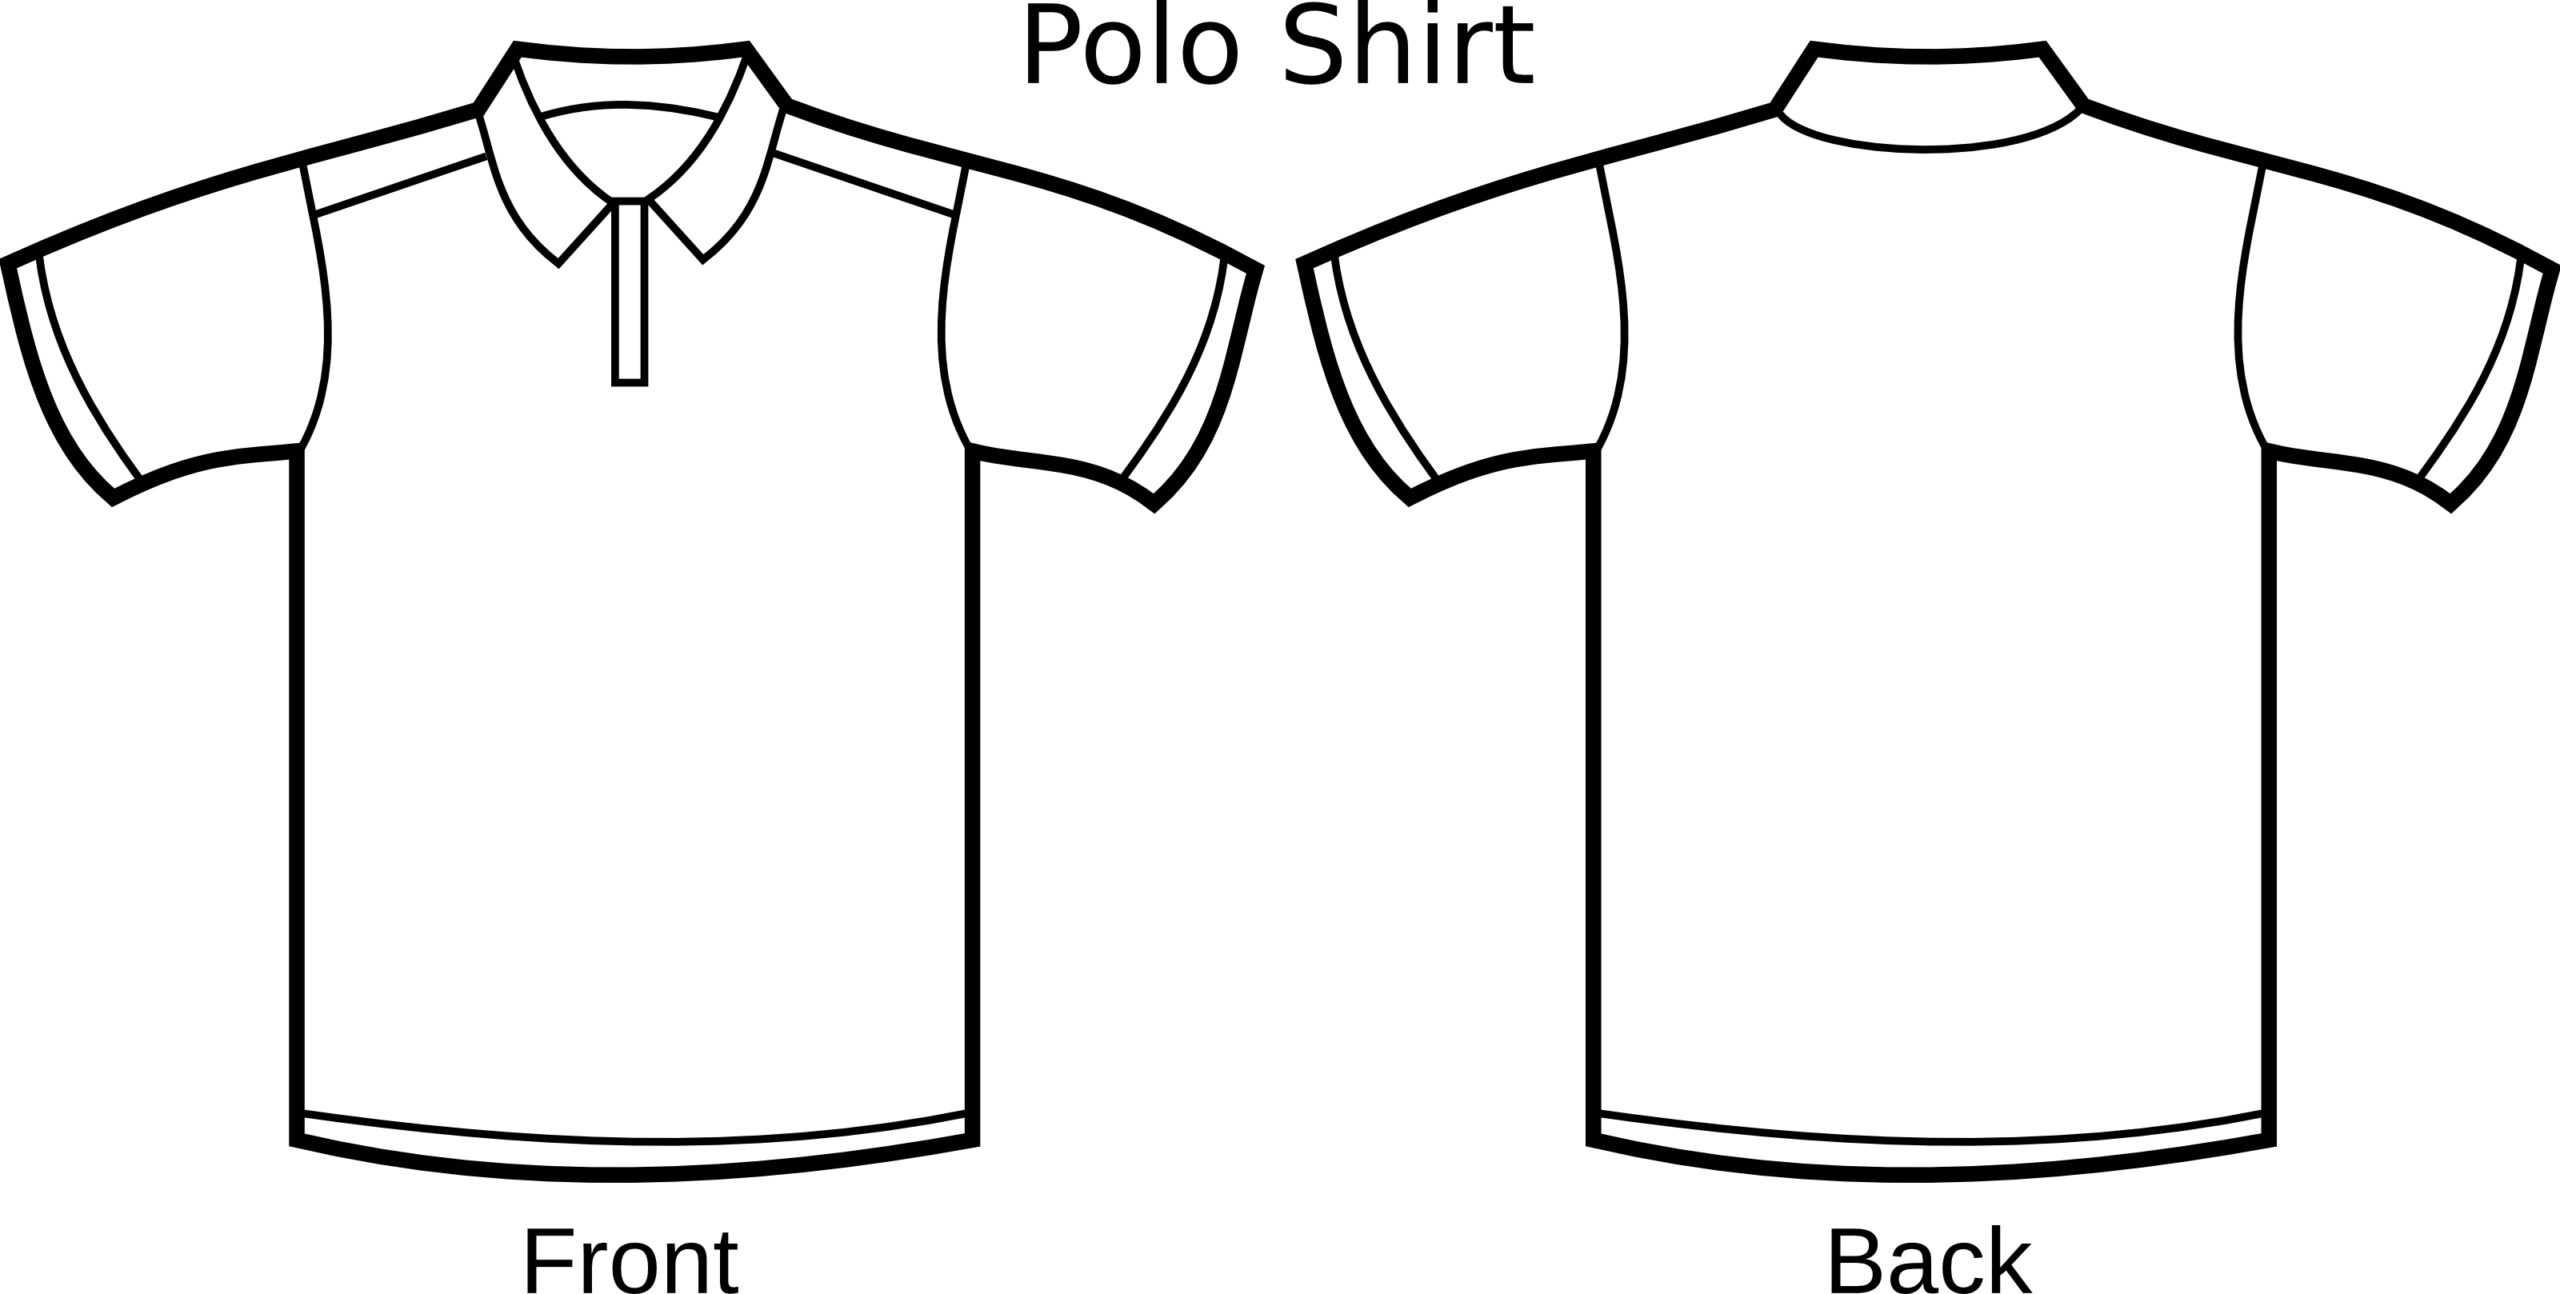 Free Blank T Shirt Outline, Download Free Clip Art, Free Within Blank T Shirt Outline Template